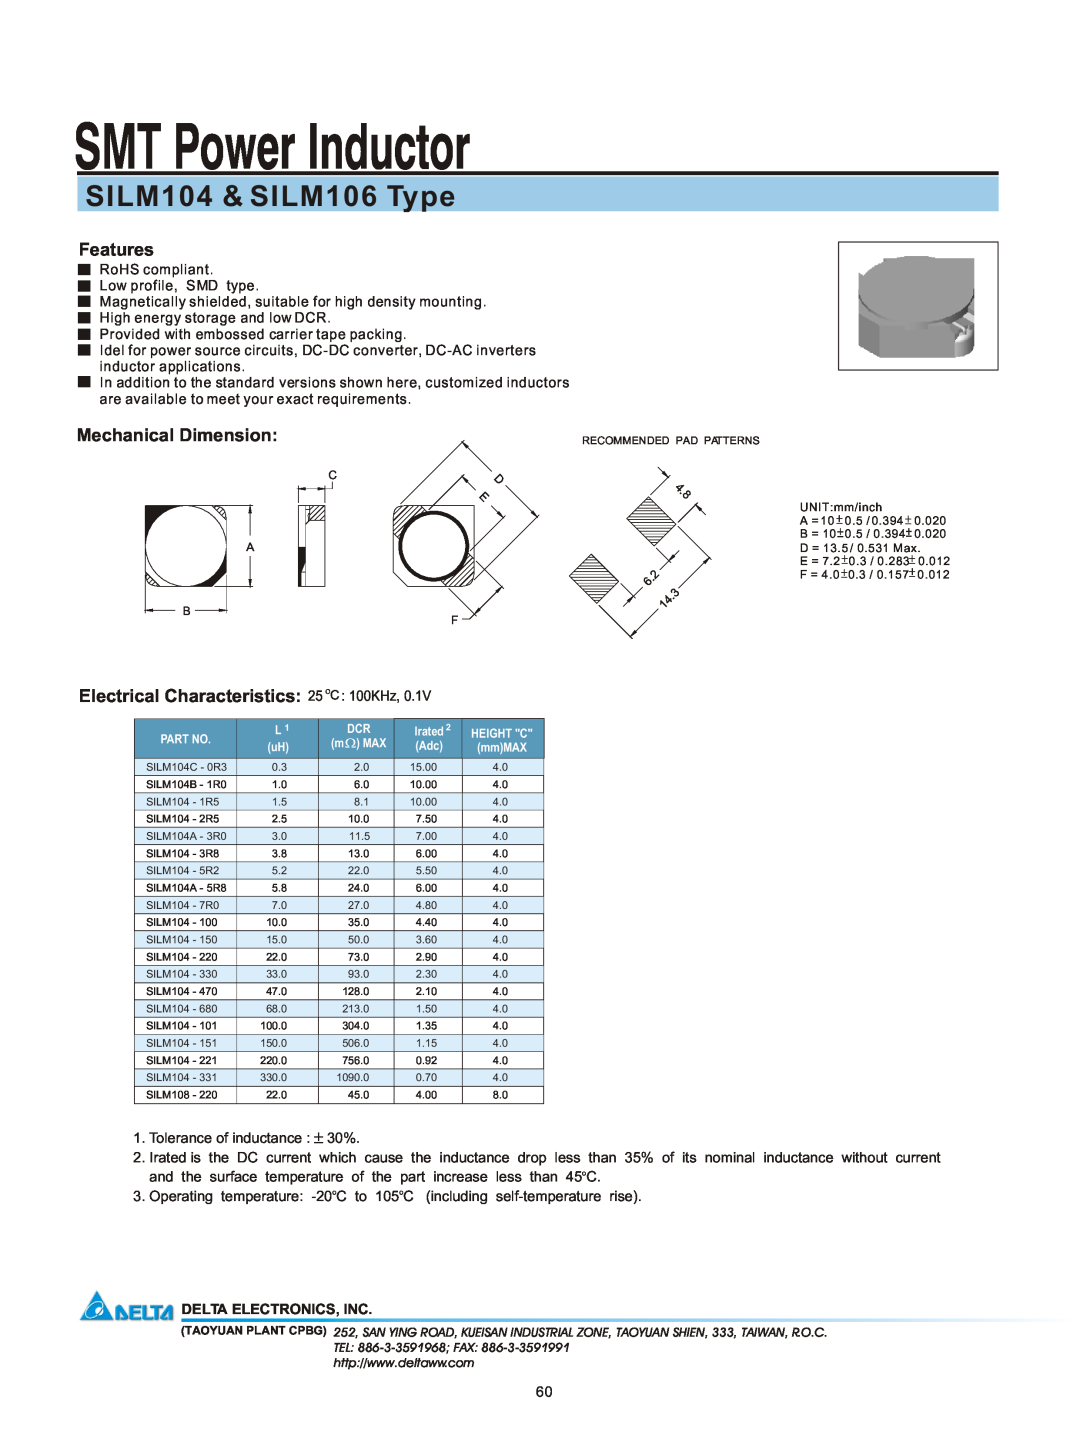 Delta Electronics manual SMT Power Inductor, SILM104 & SILM106 Type, Features, Mechanical Dimension 